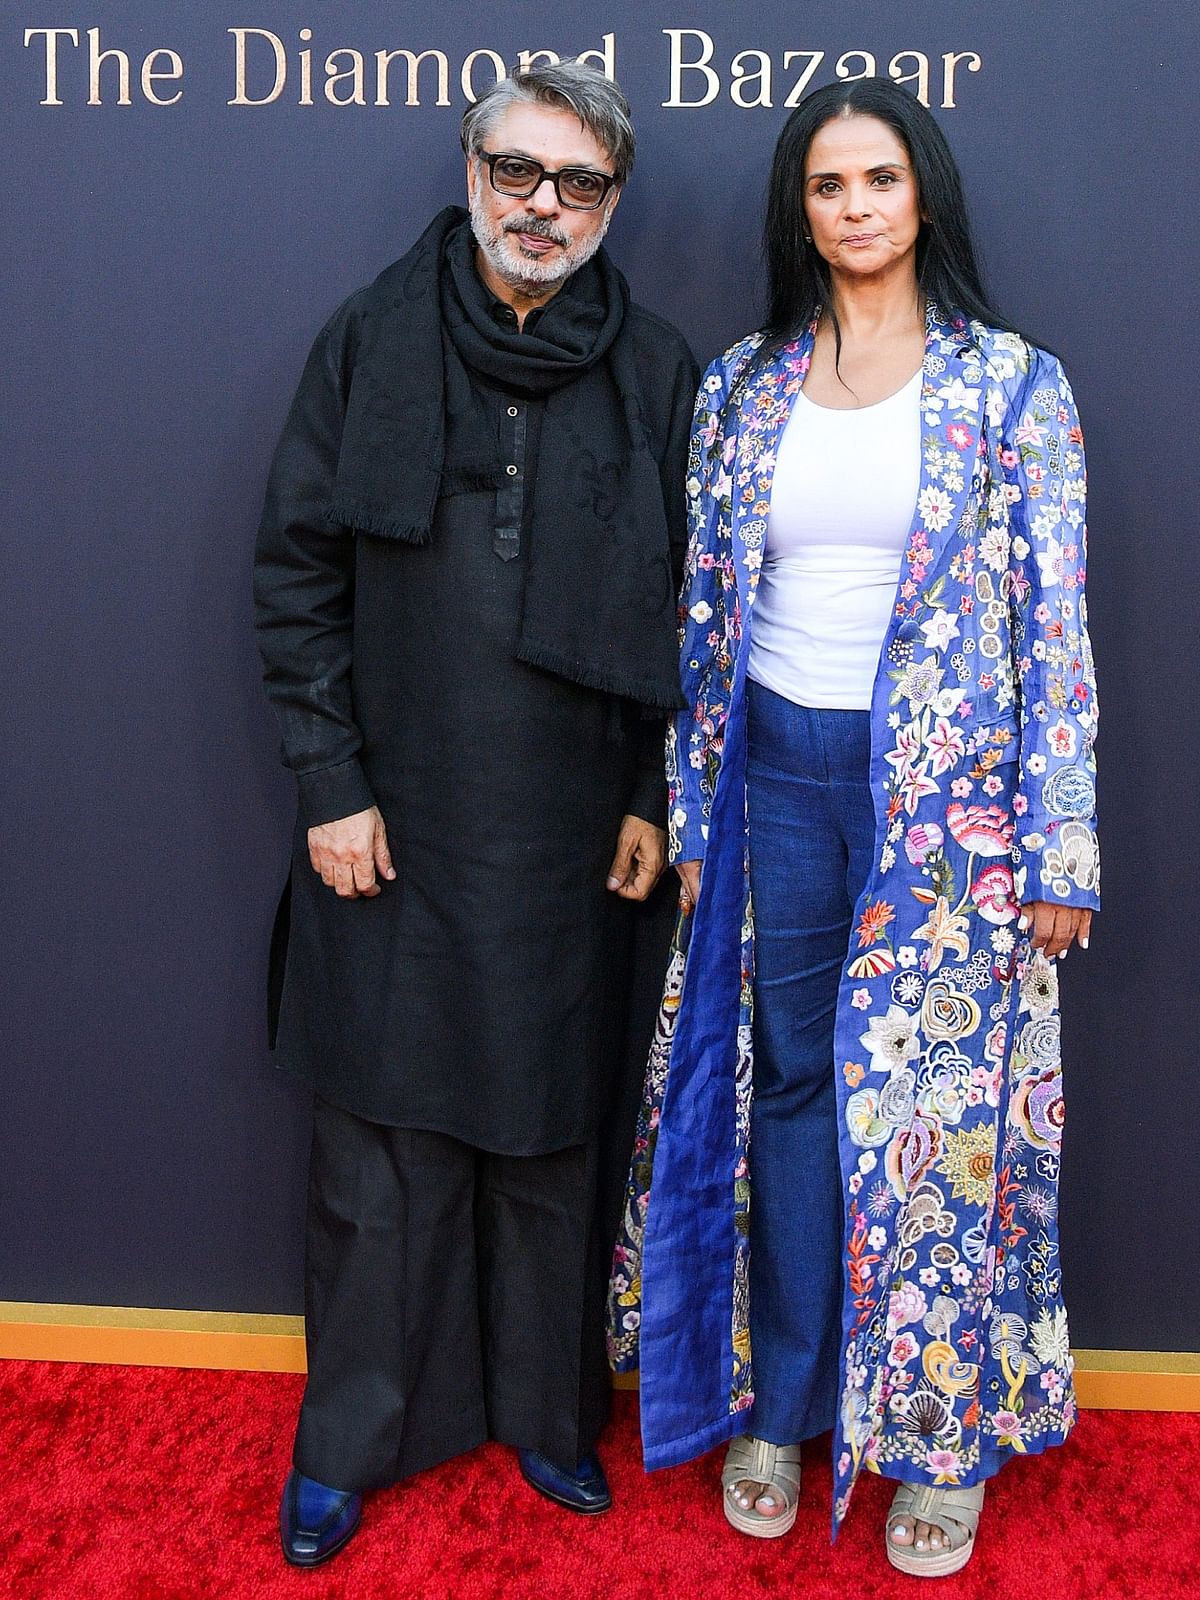 Sanjay Leela Bhansali poses with Netflix Chief Content Officer, Bela Bajaria on the red carpet during the special screening of Heeramandi: The Diamond Bazaar, in LA.